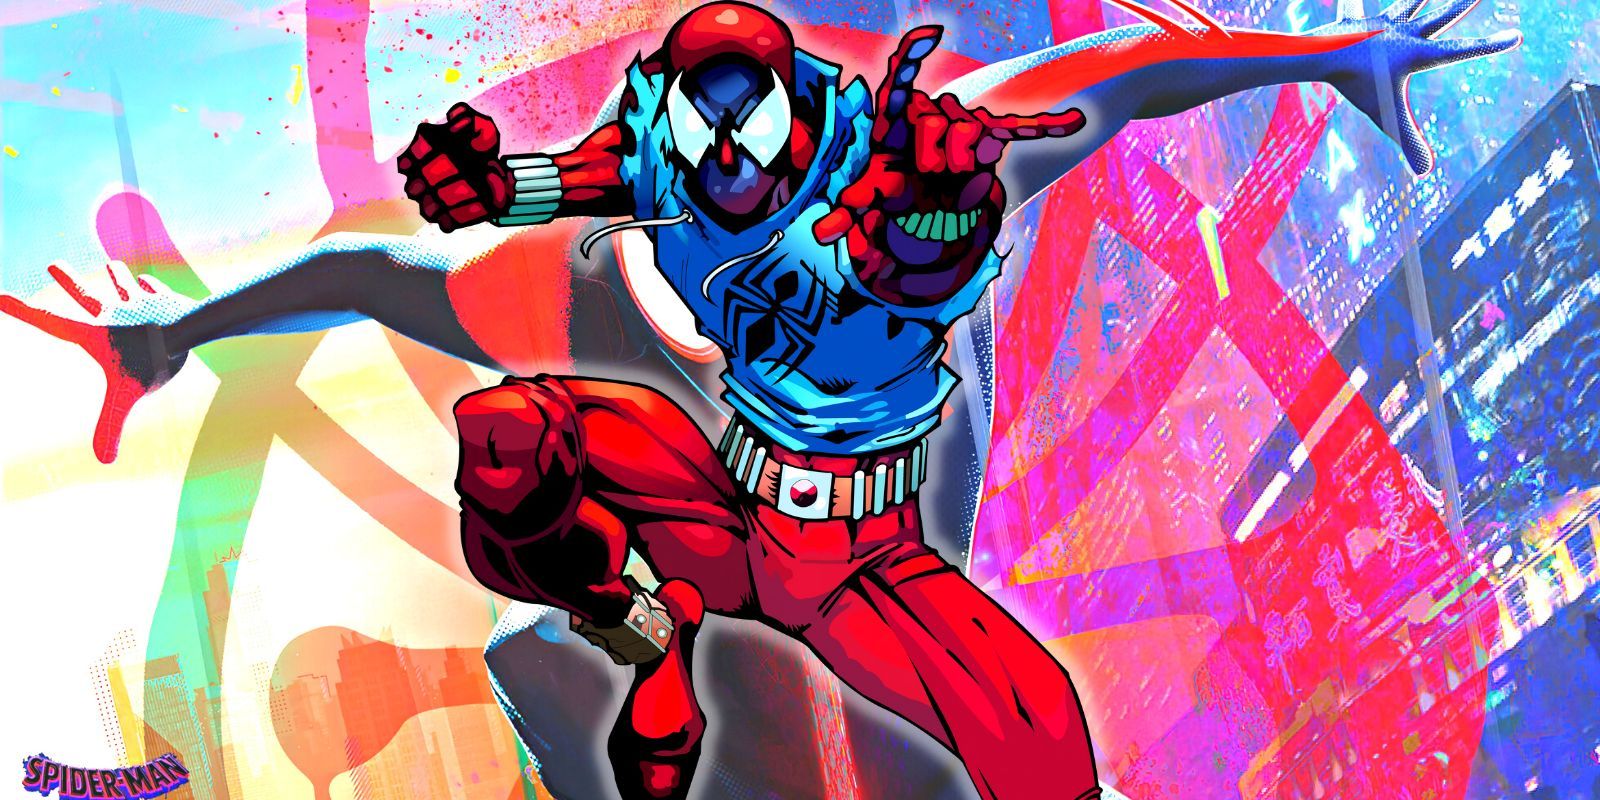 The Scarlet Spider leaping into action followed by Miles and Spider-Man 2099